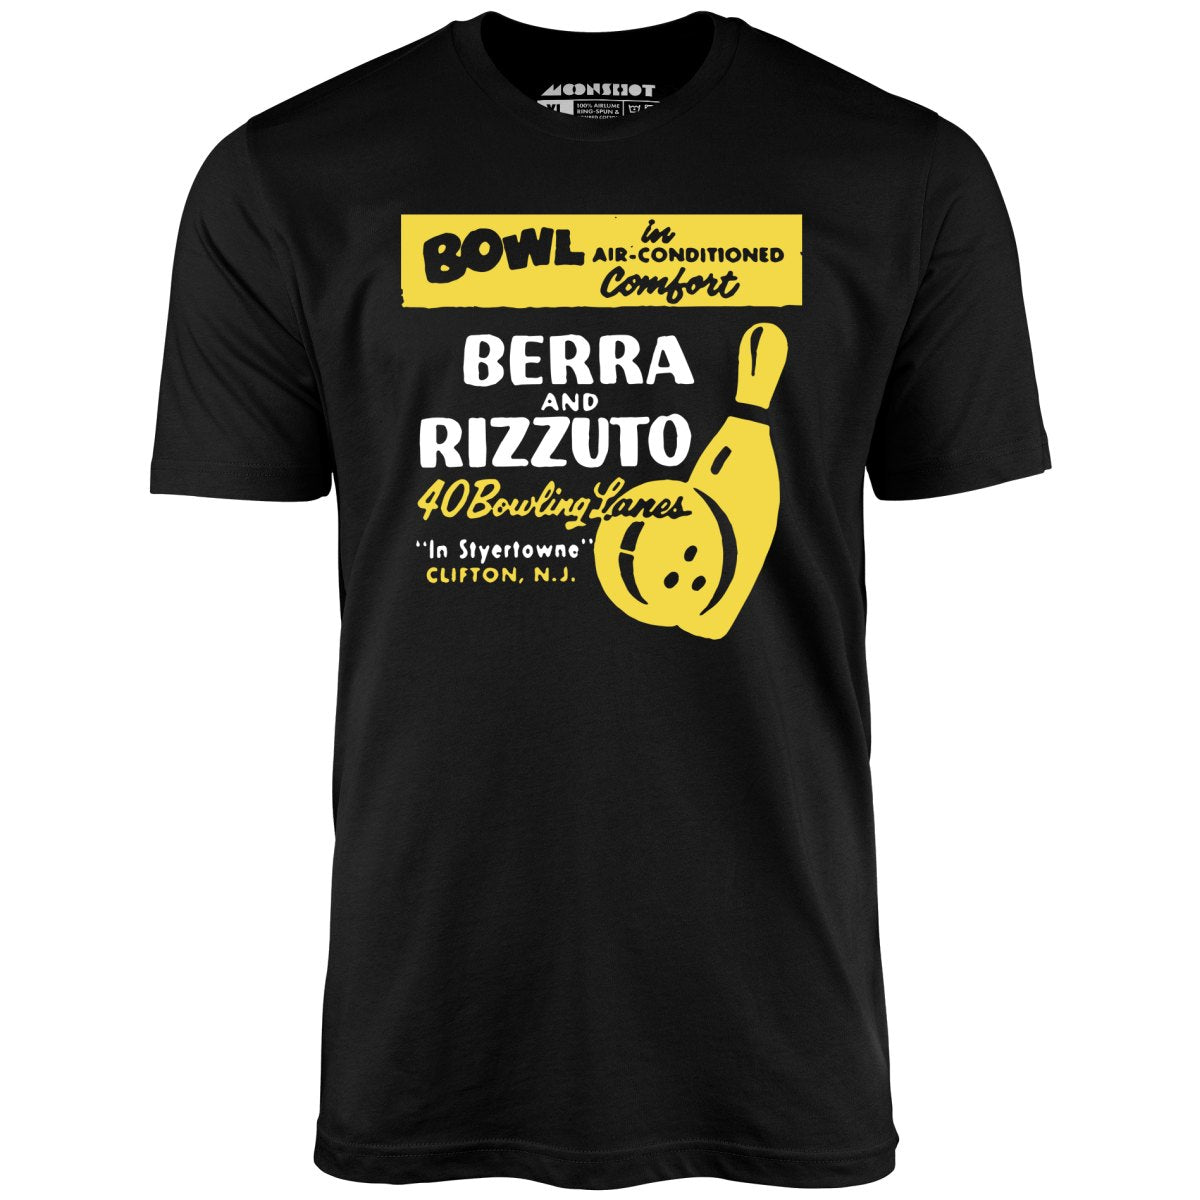 Phil Rizzuto T-Shirts for Sale